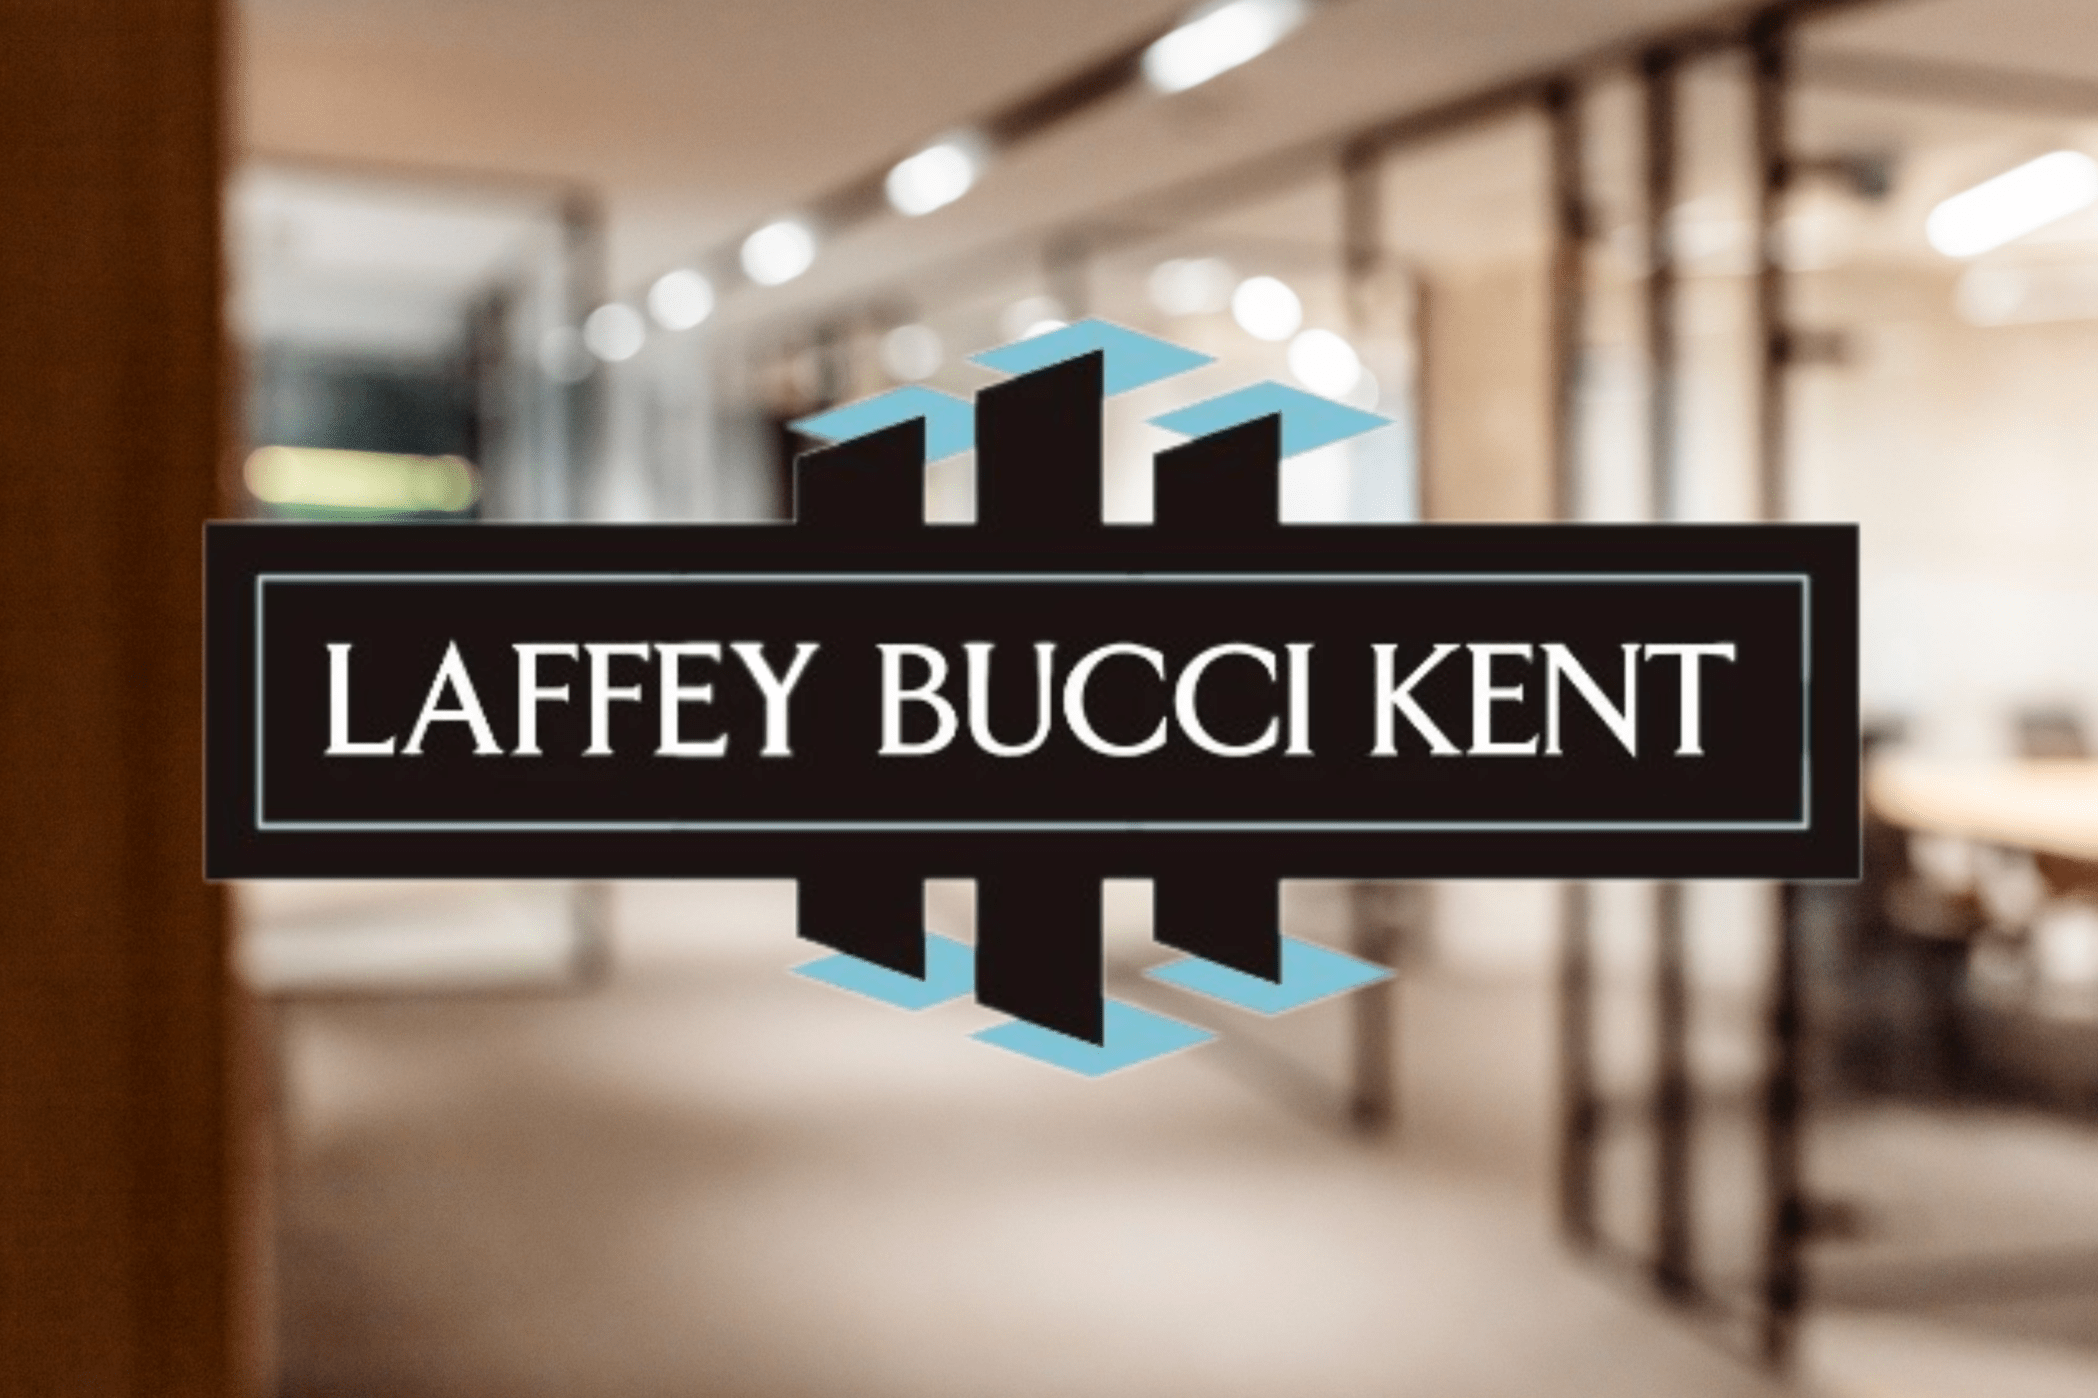 Investing in Case Resources Increased Revenue 365% Over 3 Years: Laffey, Bucci & Kent